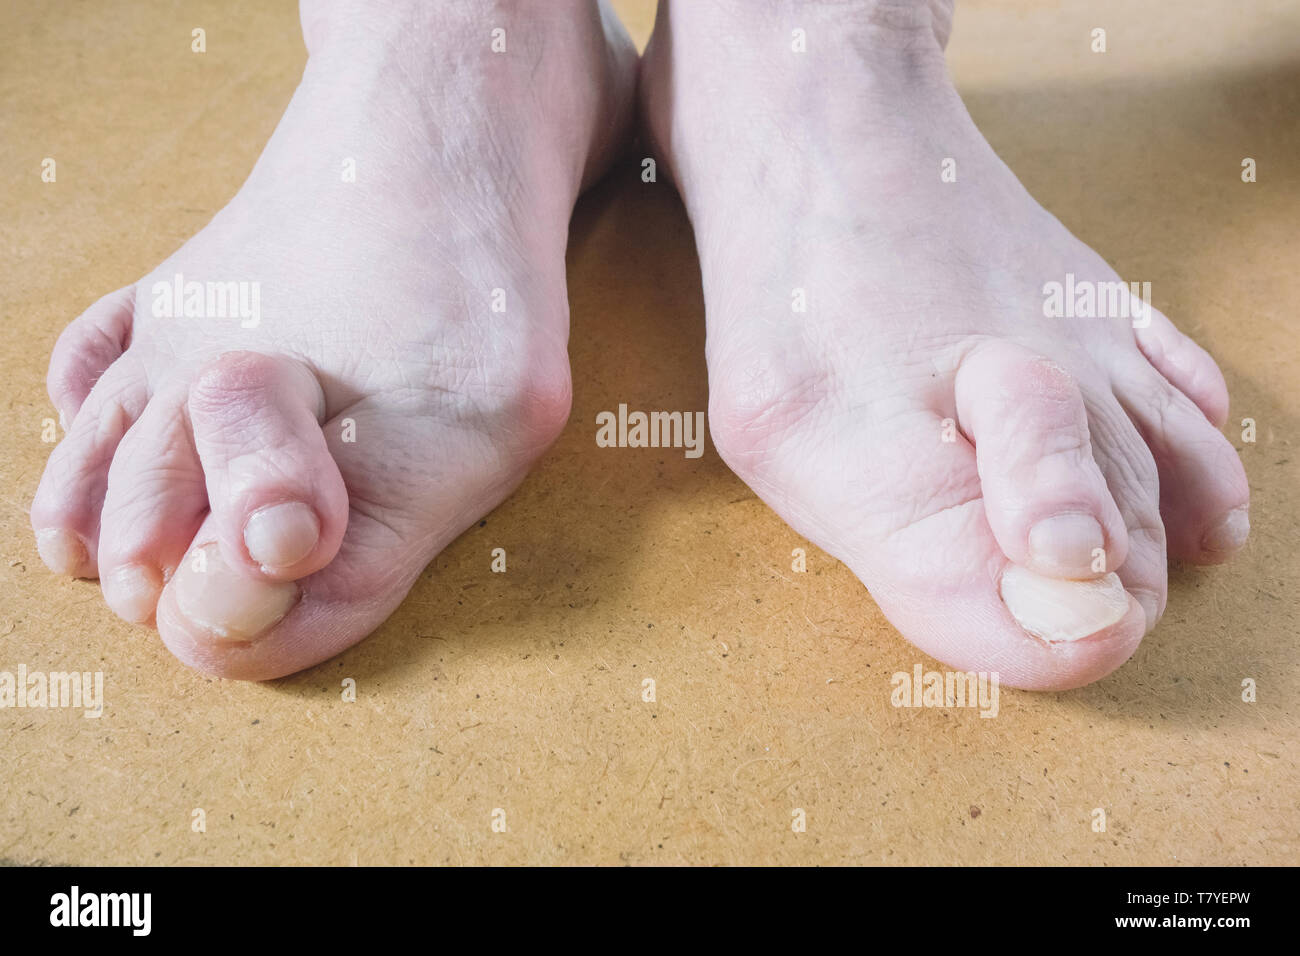 Valgus Deformity of Female Leg Due Hallux Valgus and Weakness of Ligaments. Stock Photo